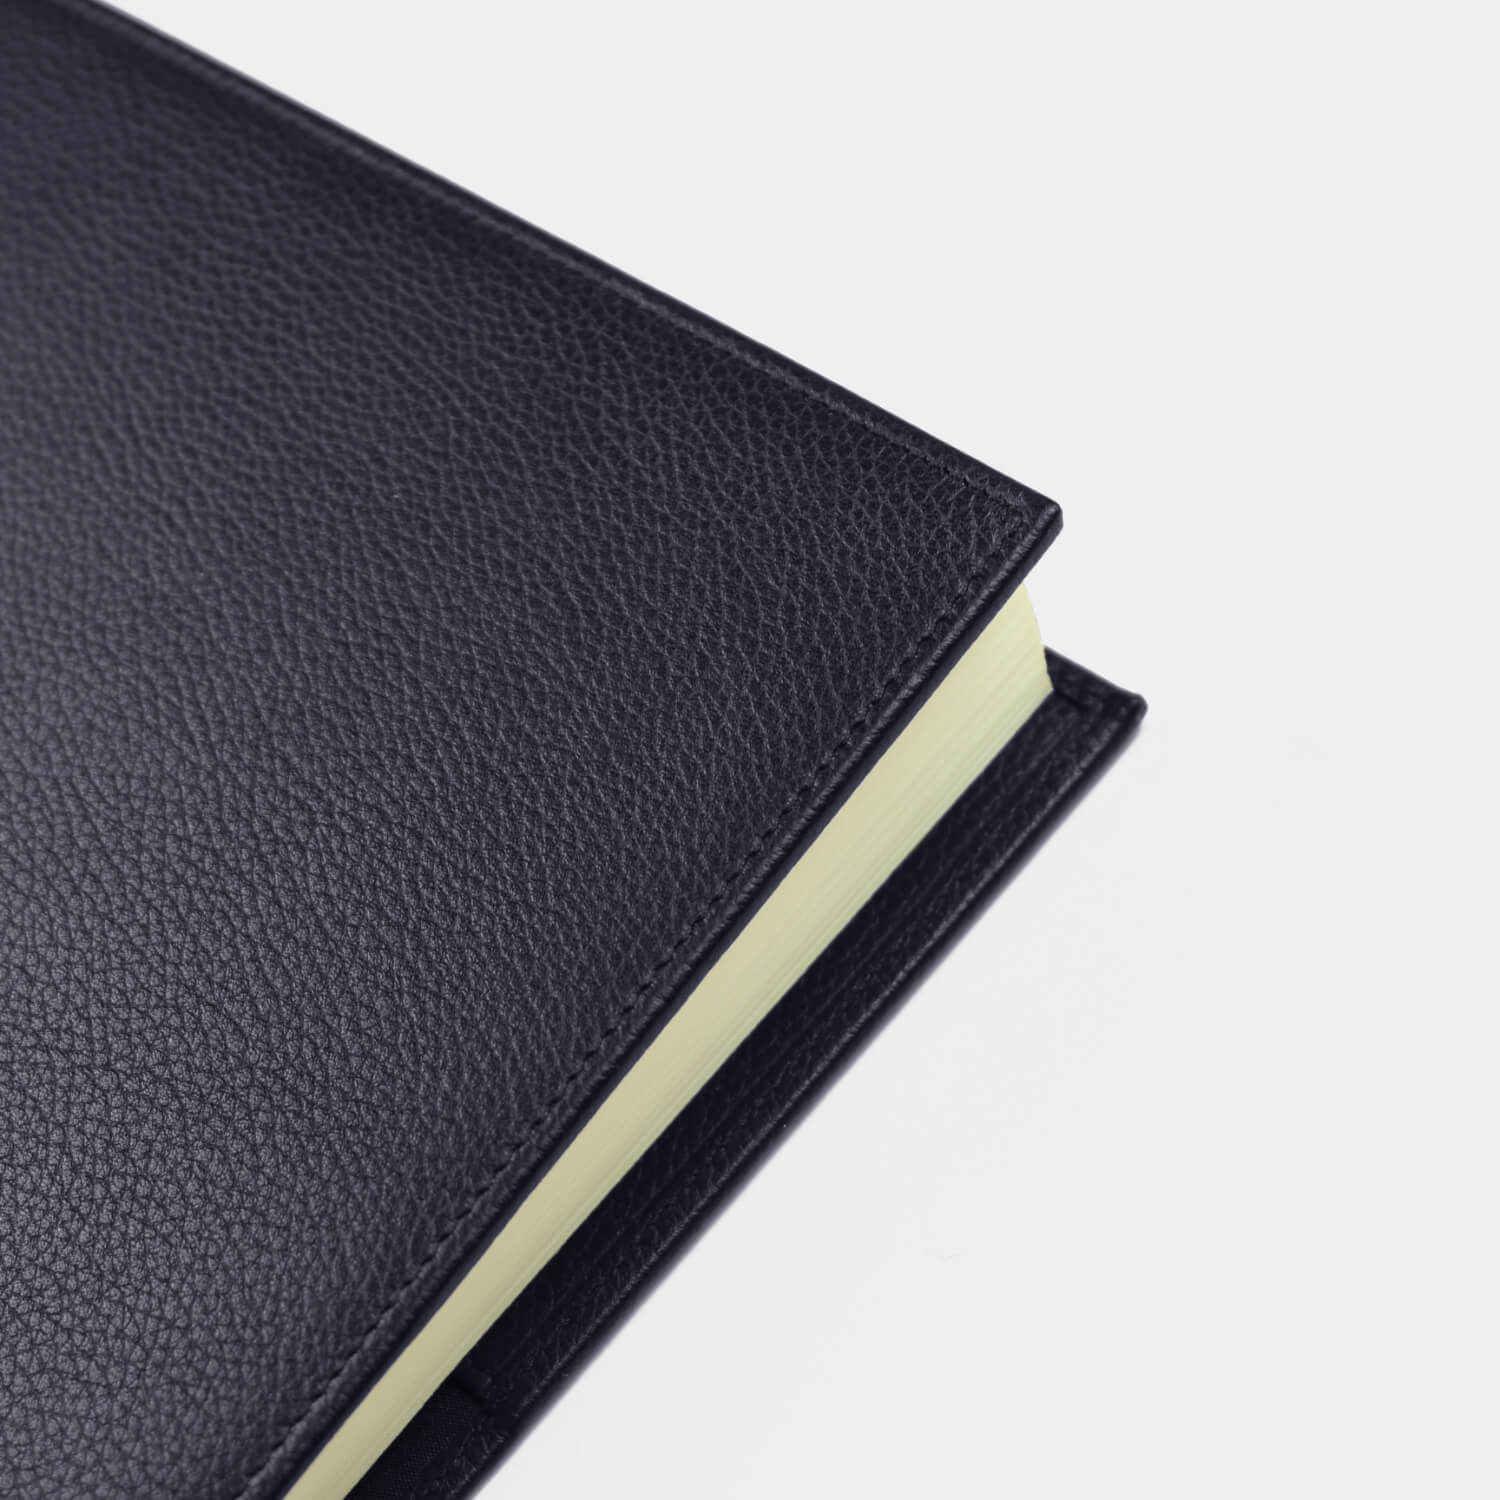 A6 fine grain leather notebook cover with lined or plain 80gsm paper